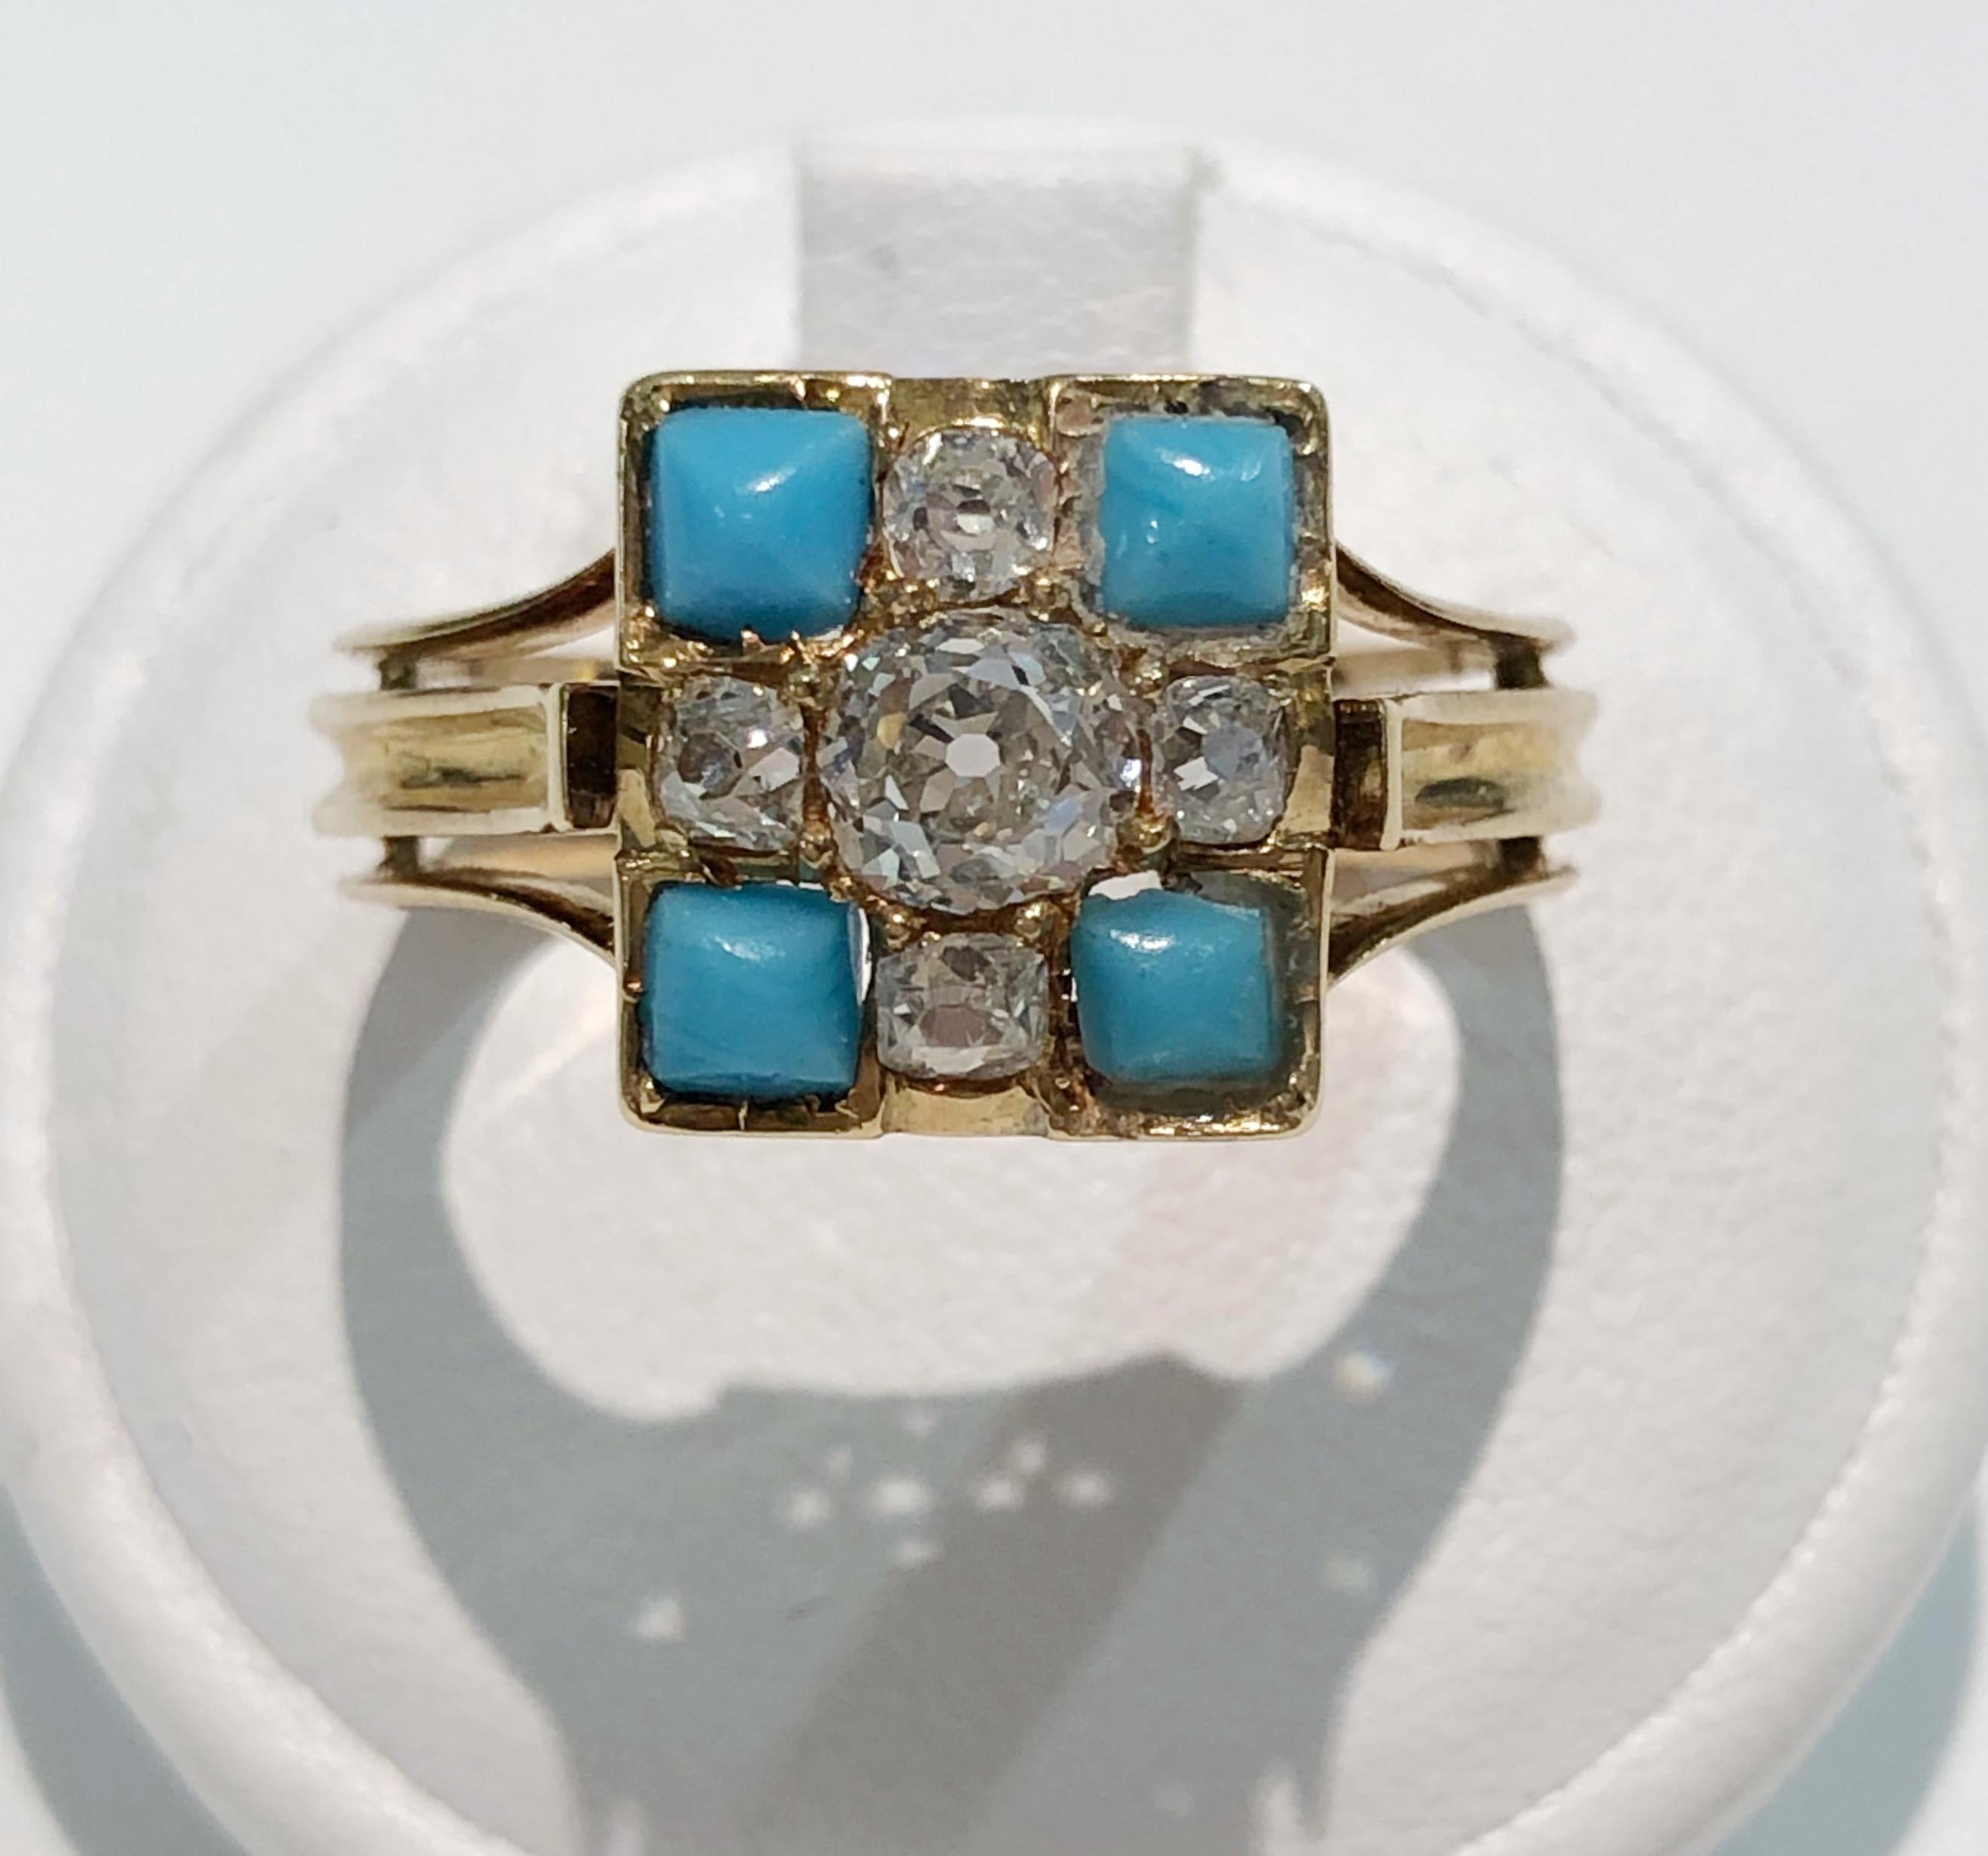 Vintage square ring with 18 karat yellow gold band, turquoise and diamonds, Italy 1890s-1910s
Ring size US 7